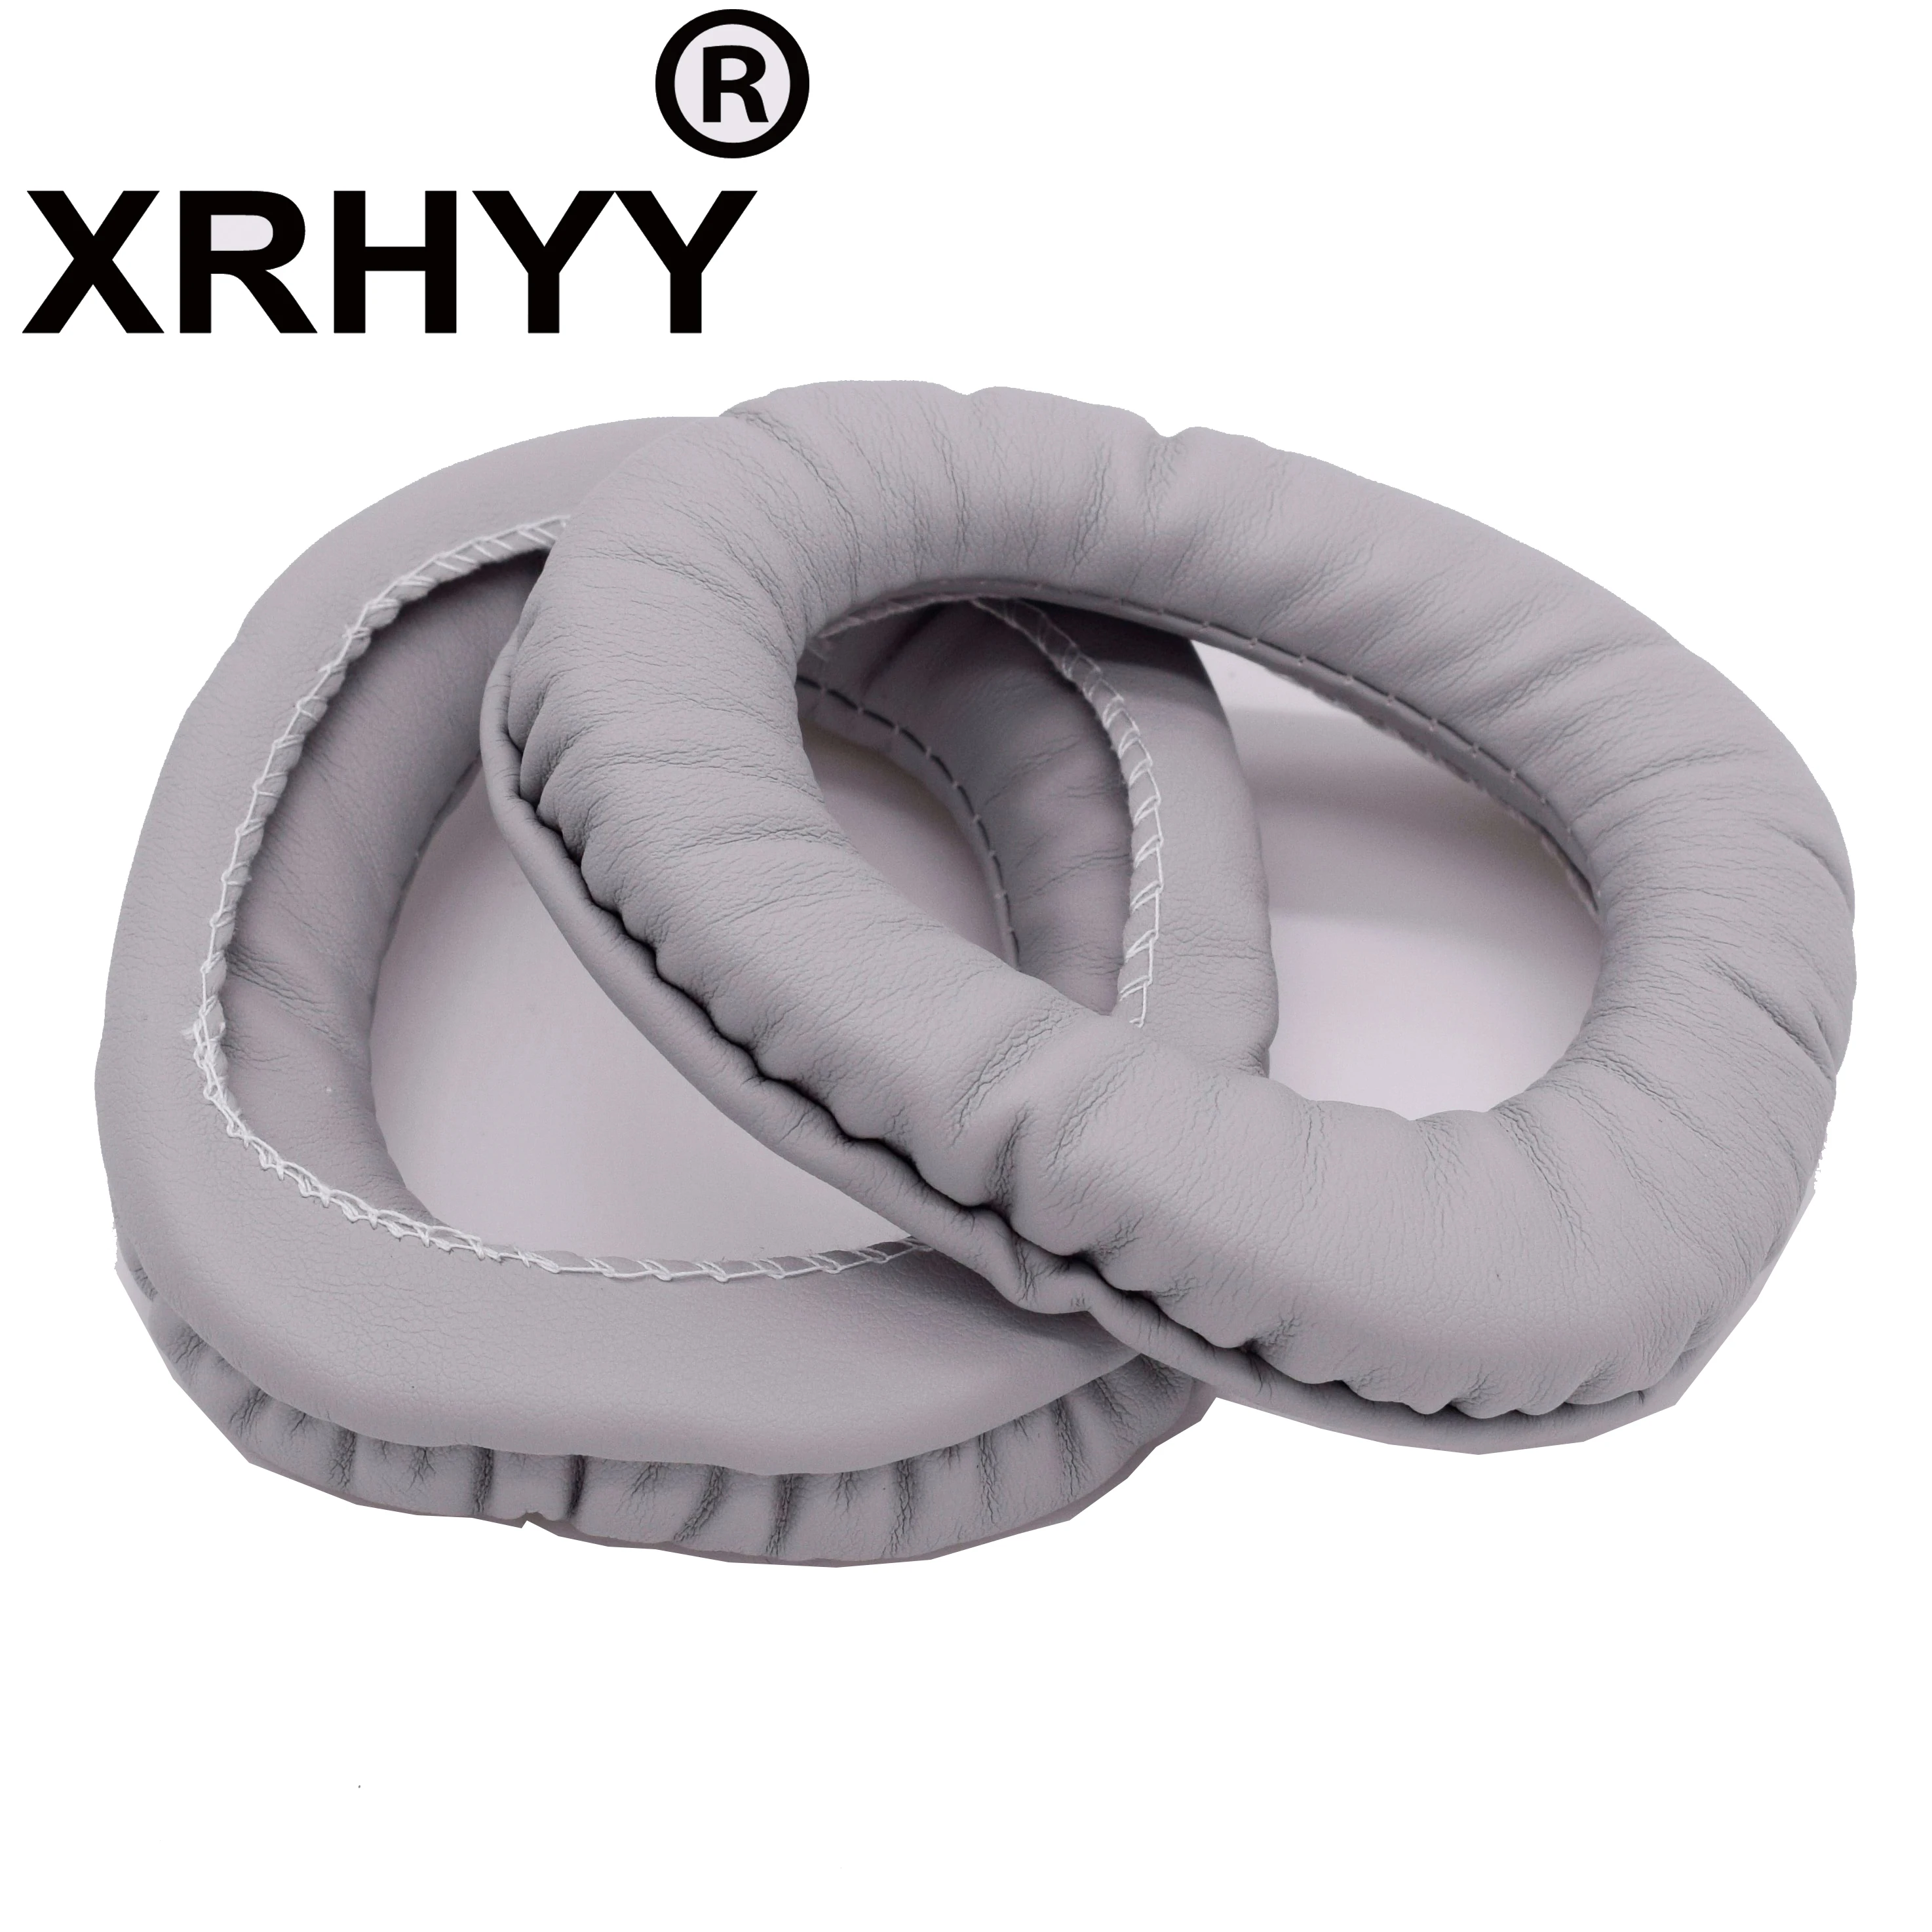 

XRHYY Grey Foam PU Leather Replacement Ear Pad Cushion Earpads Fit For Somic Headphones G909 G909S G909N G909L